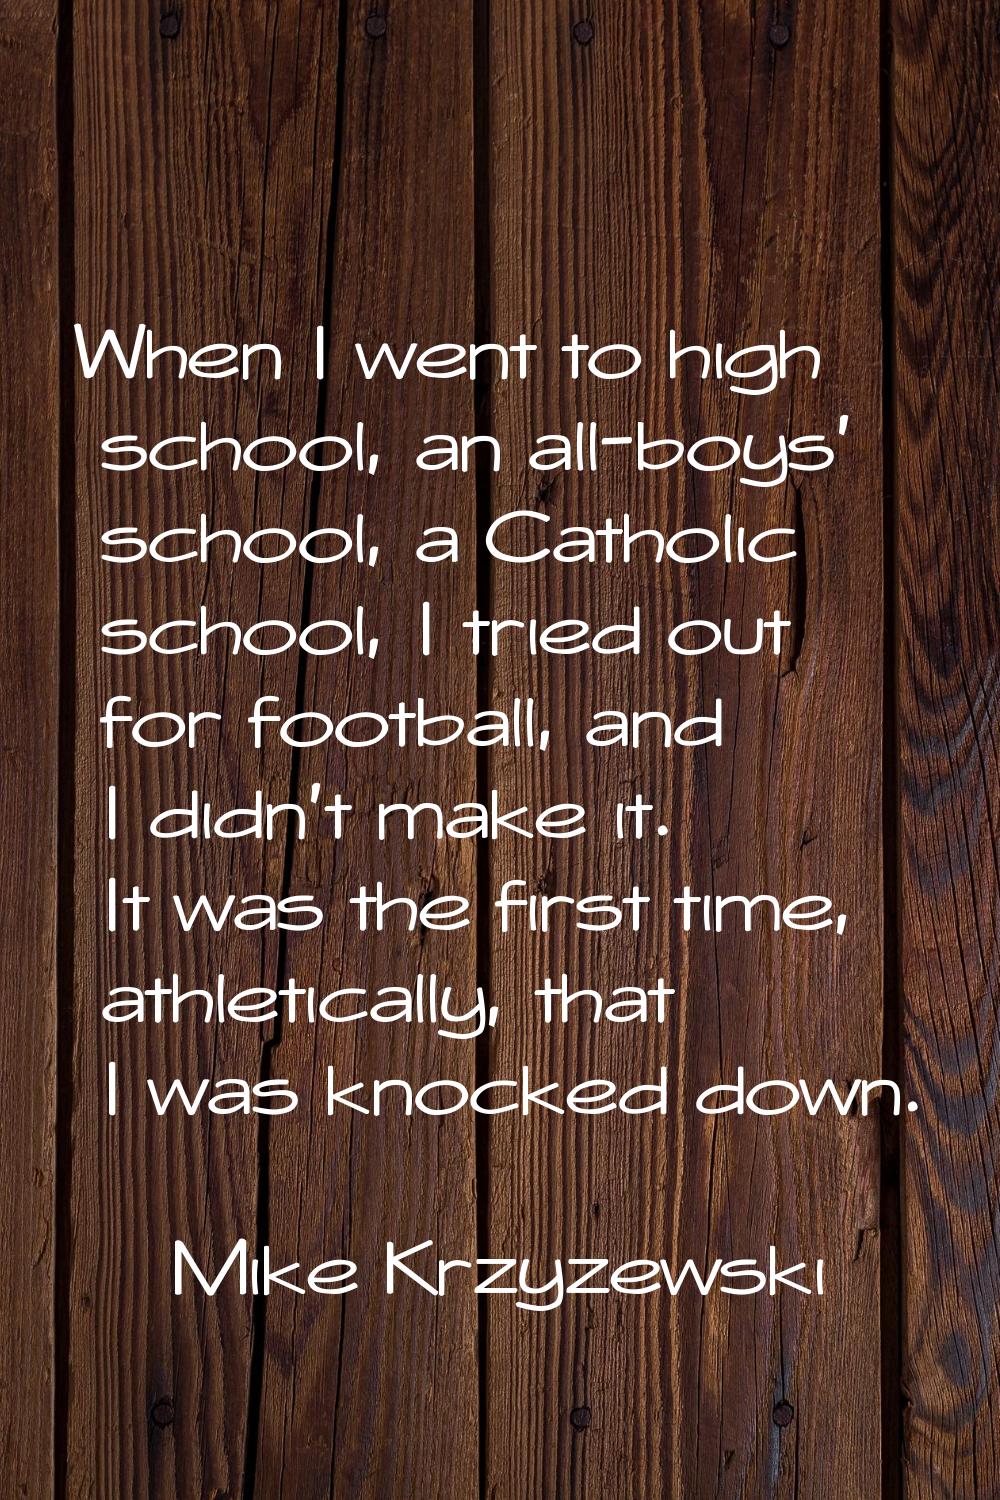 When I went to high school, an all-boys' school, a Catholic school, I tried out for football, and I